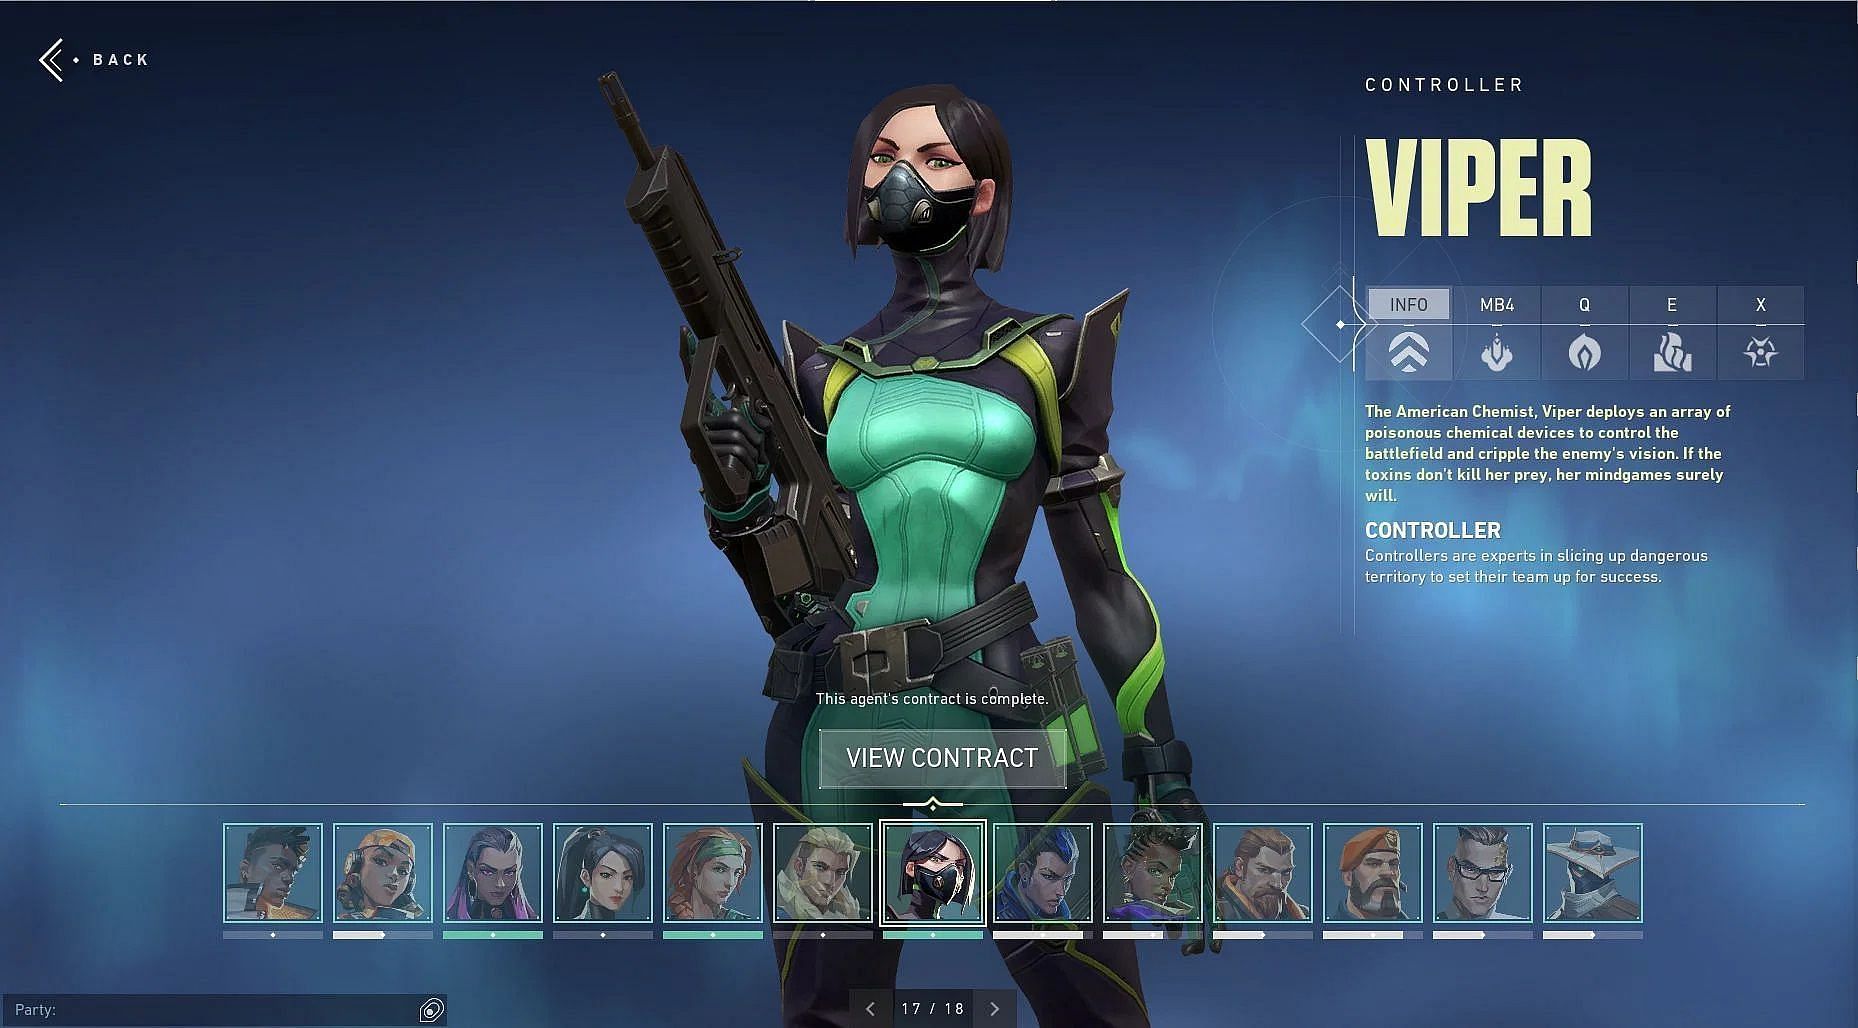 Viper is a controller agent in Valorant (Image via Riot Games)